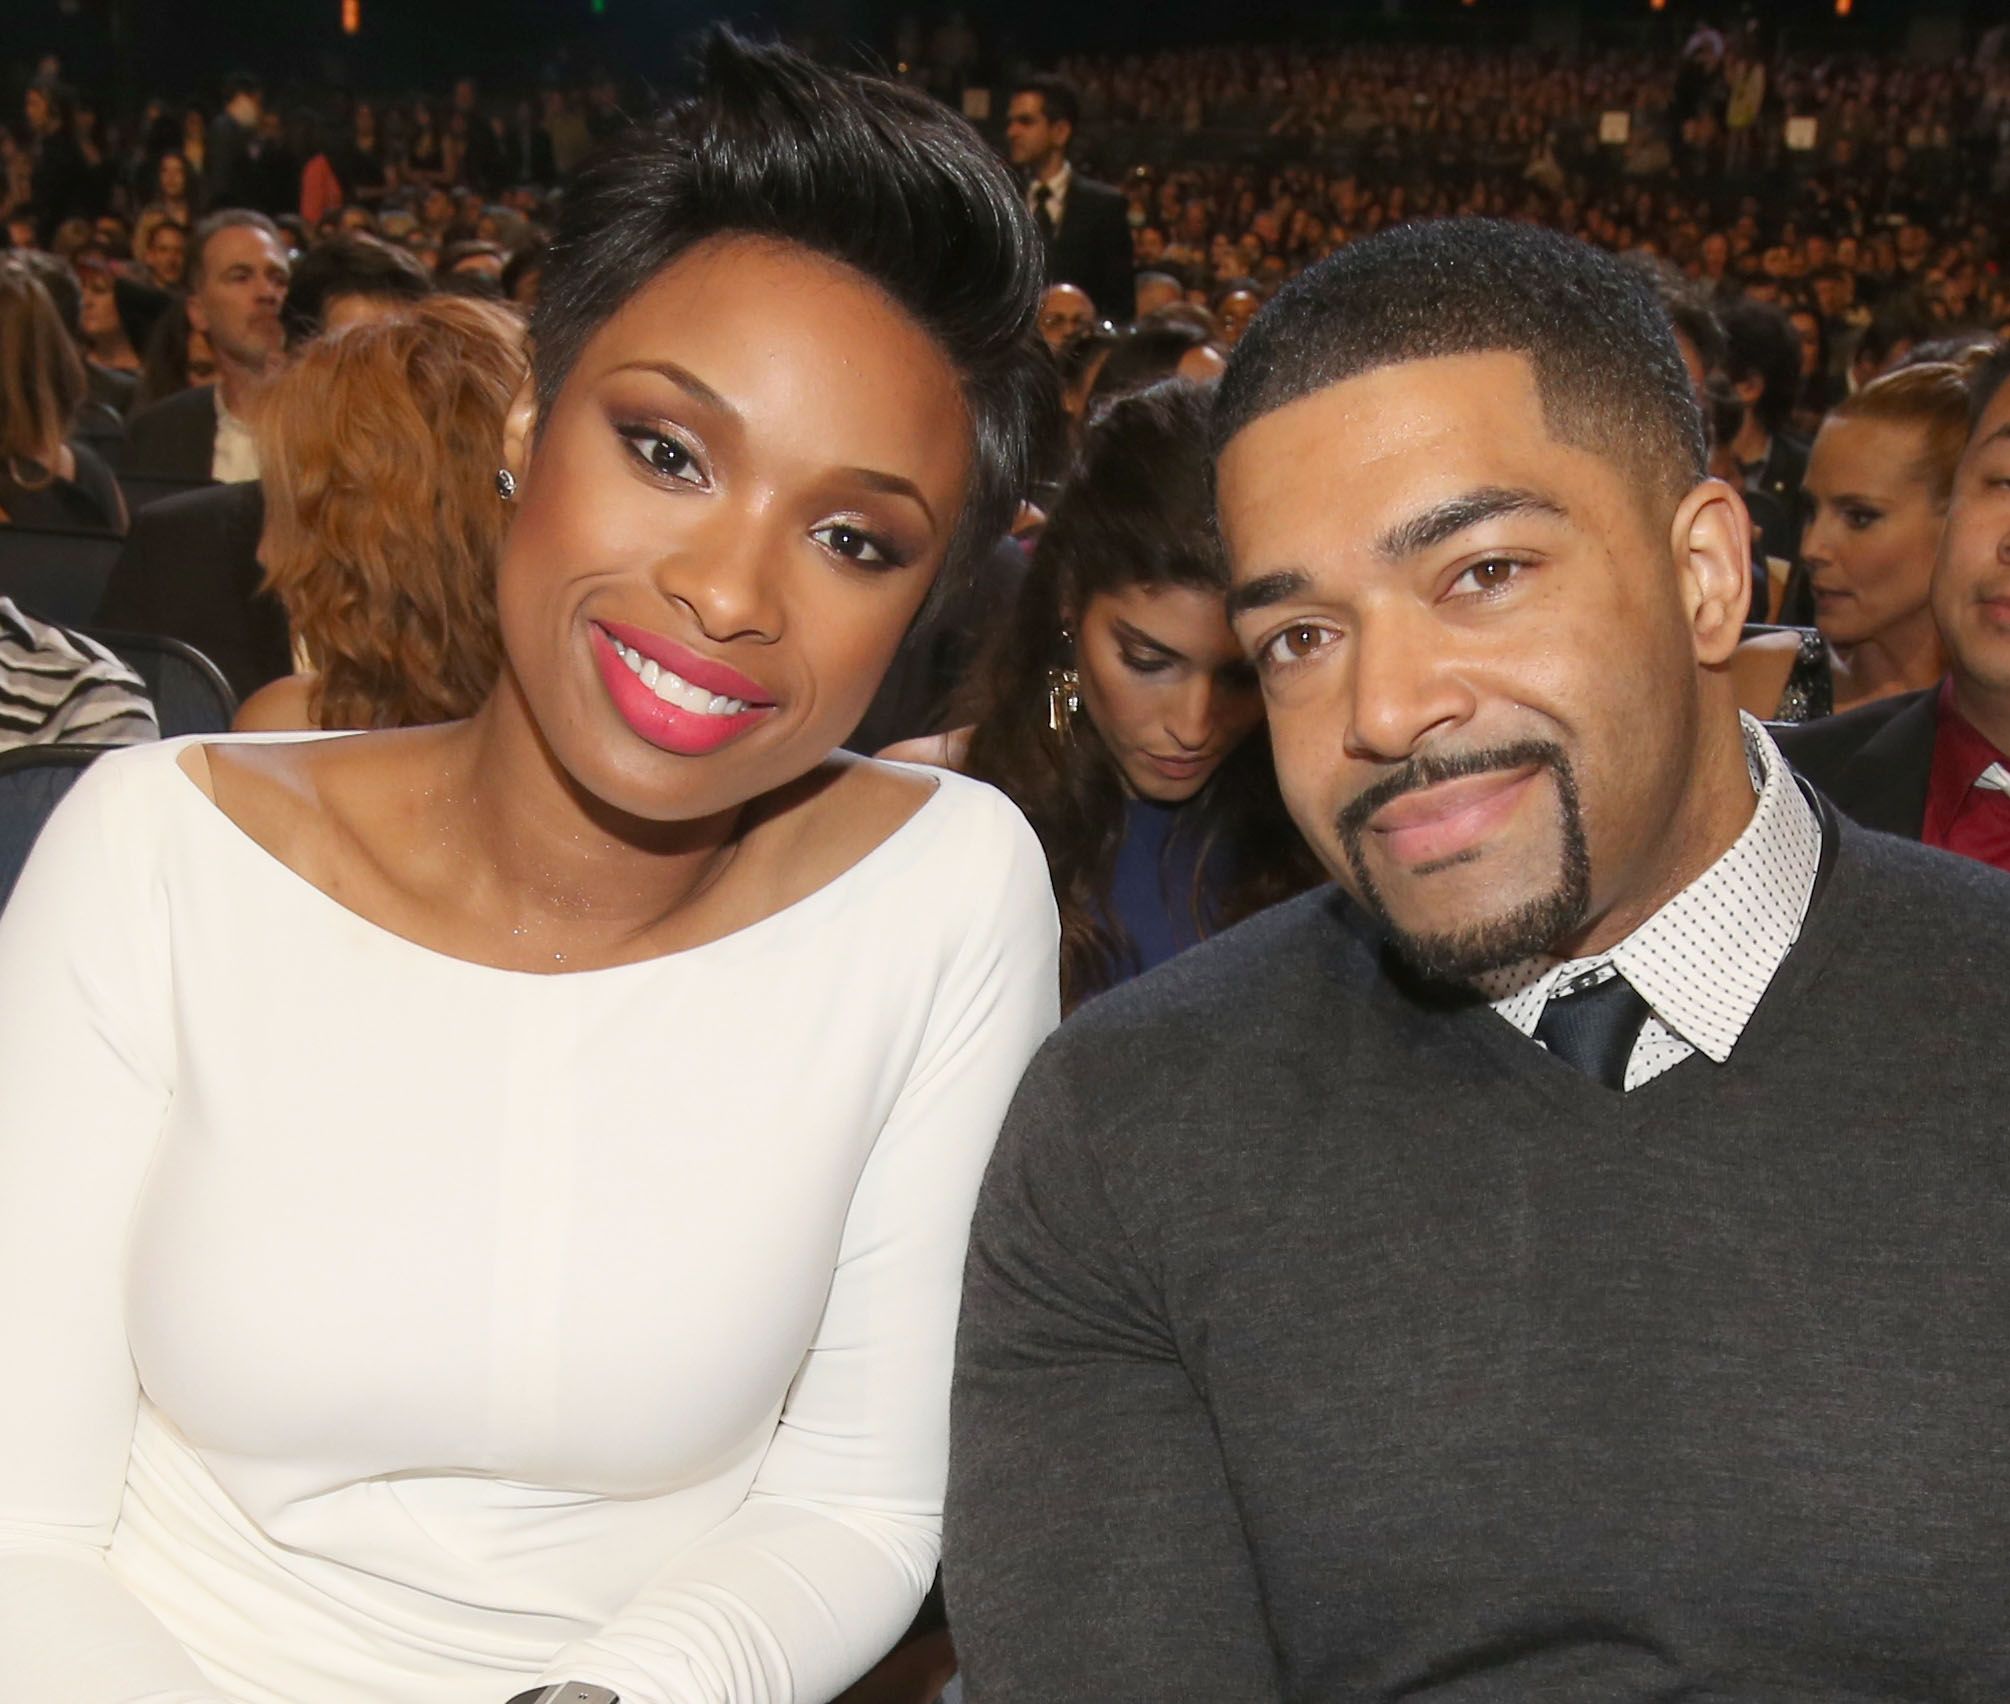 Jennifer Hudson and pro wrestler/actor David Otunga at The 40th Annual People's Choice Awards at Nokia Theatre L.A. Live on January 8, 2014 | Photo: Getty Images